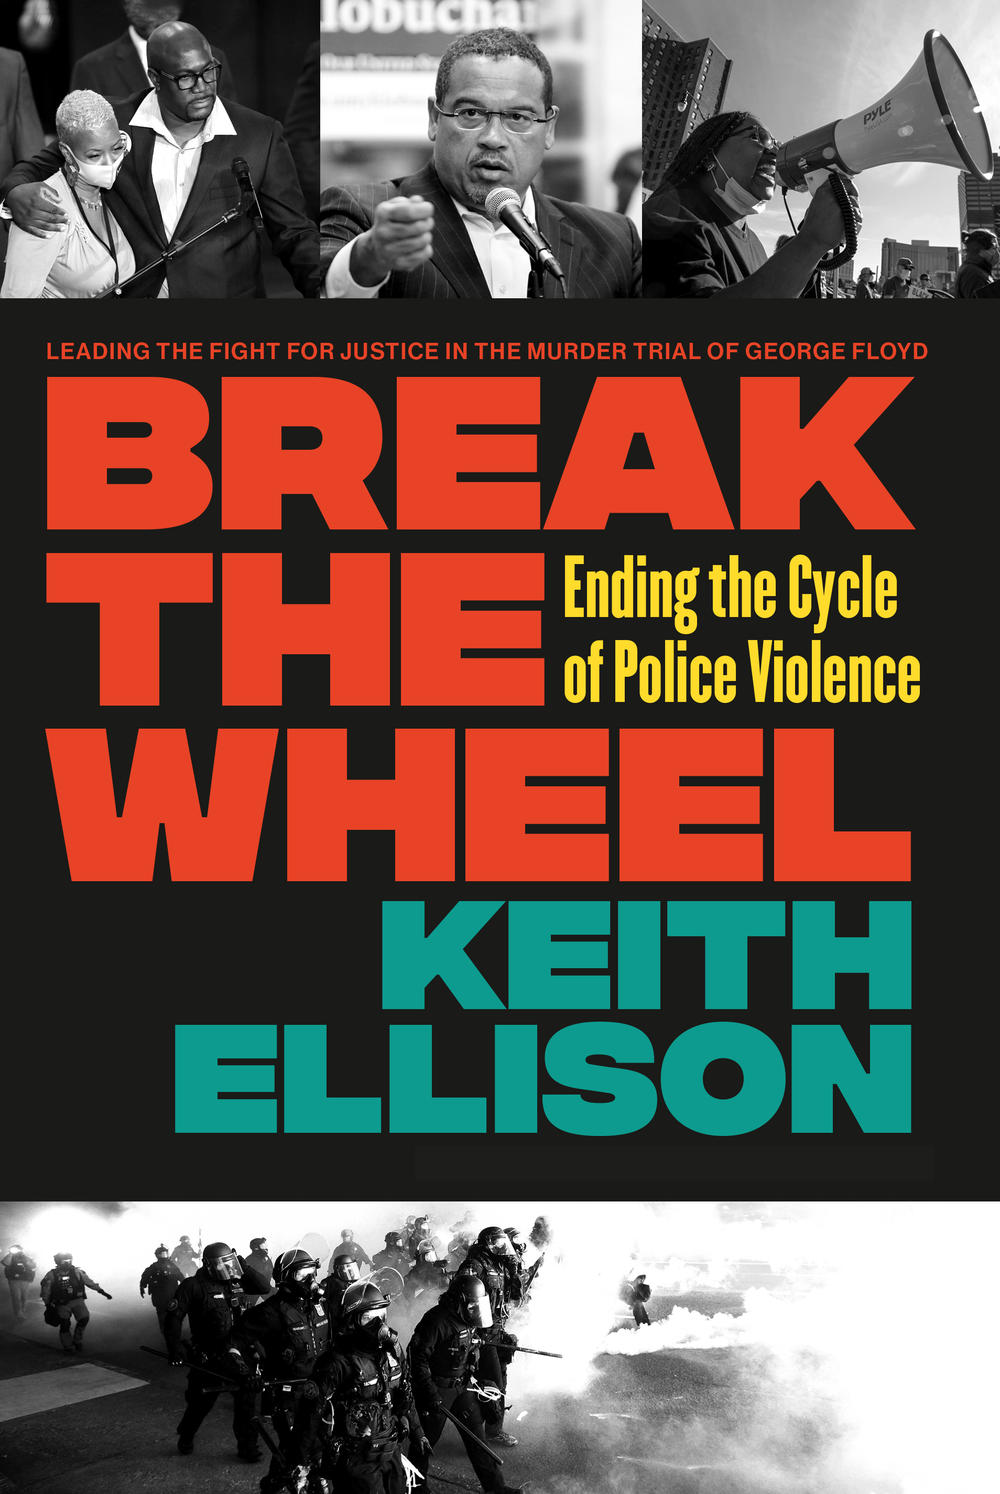 Keith Ellison is releasing a book about police violence almost exactly three years after the murder of George Floyd.